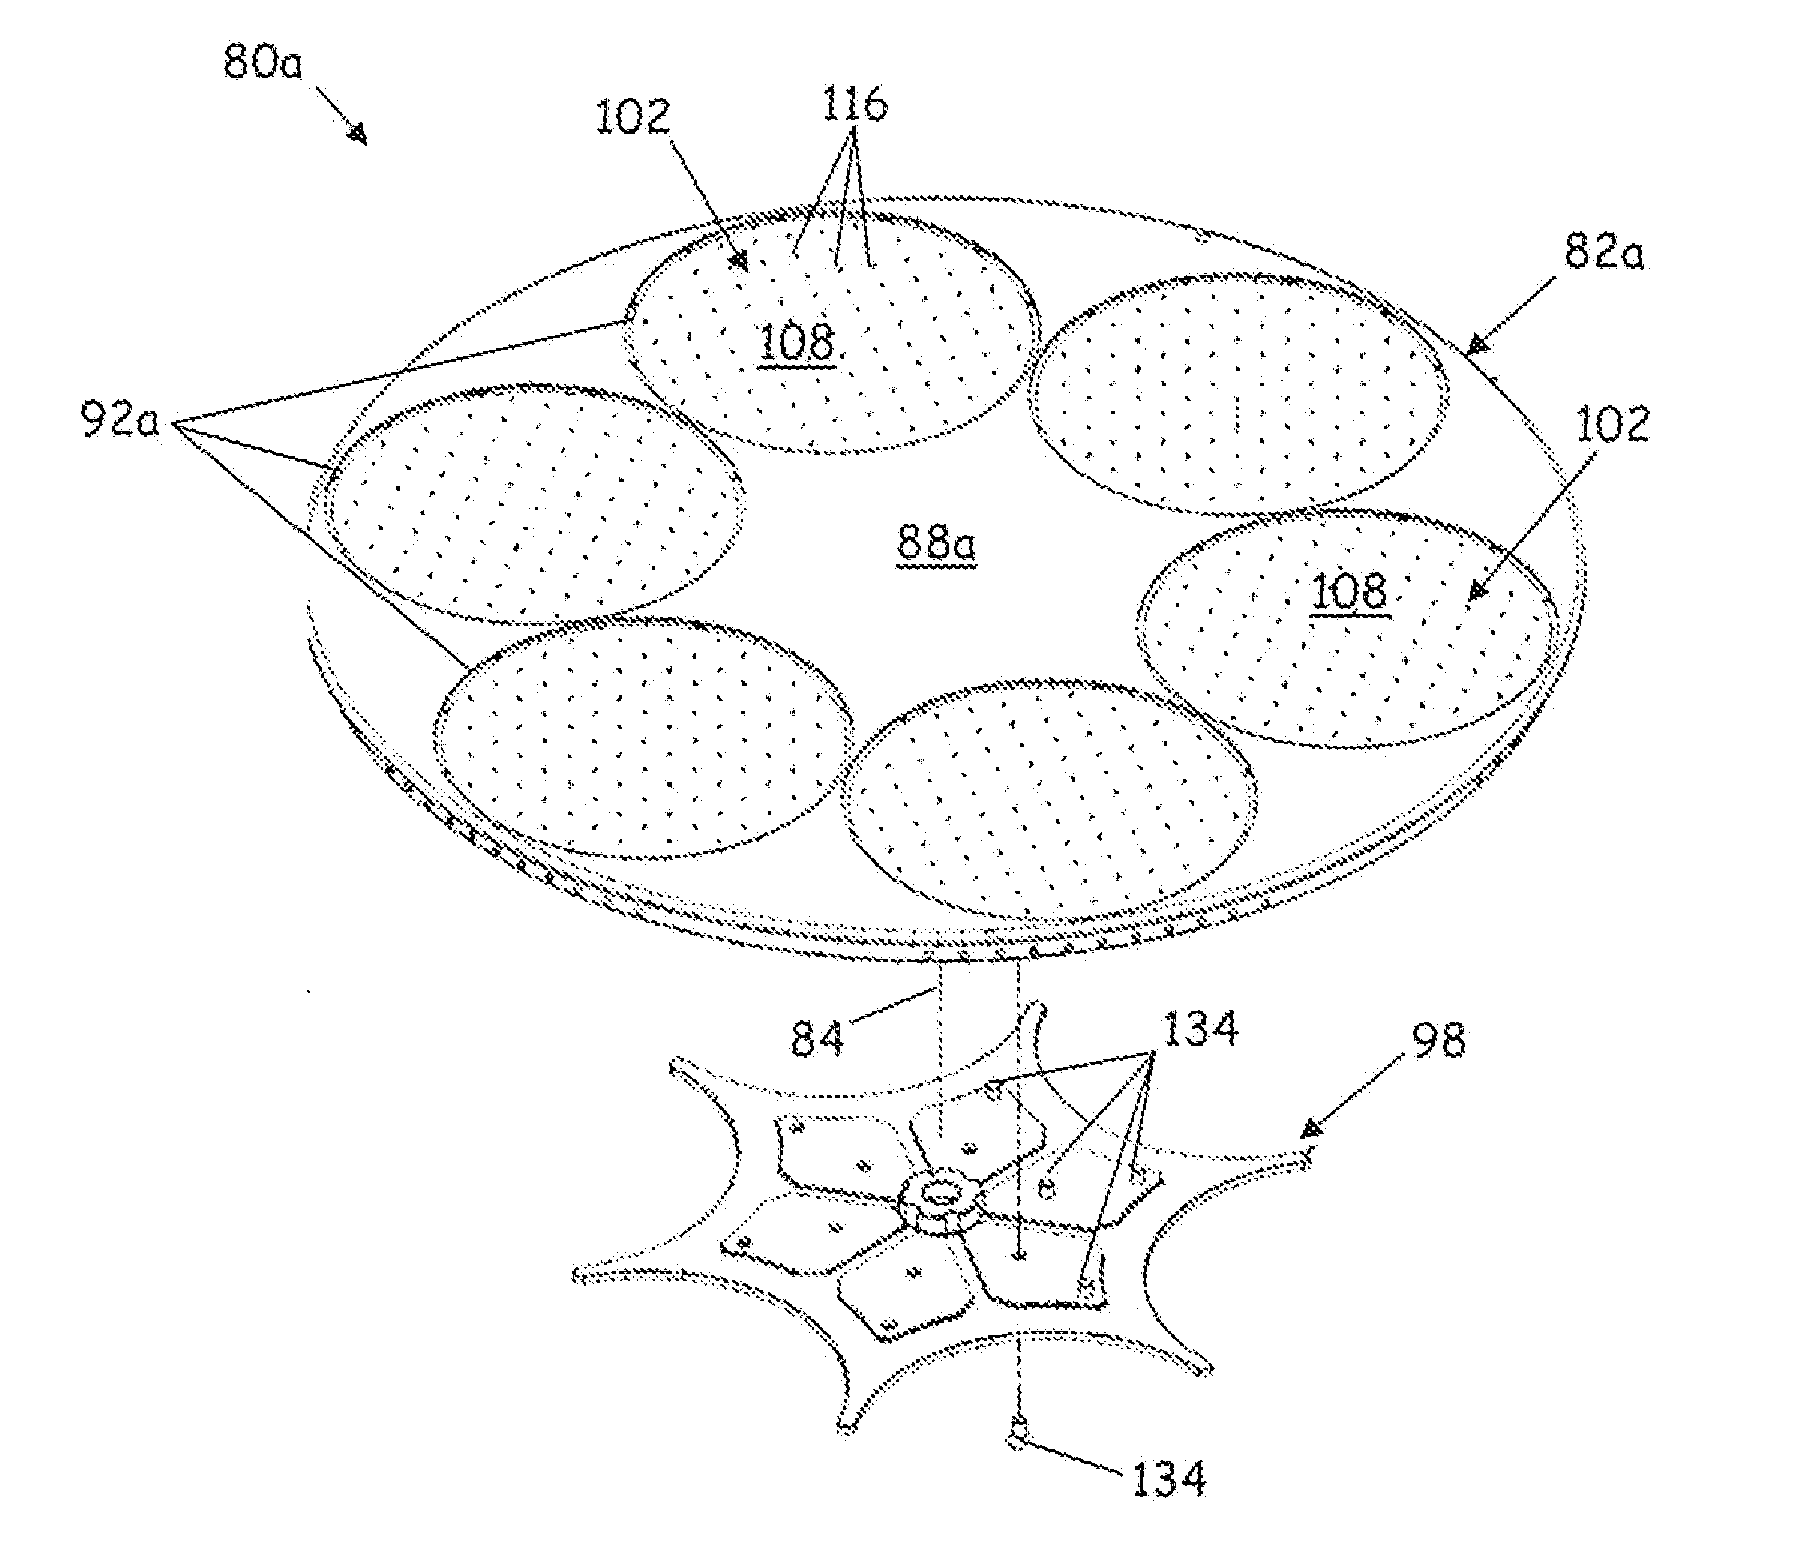 Wafer carrier with temperature distribution control